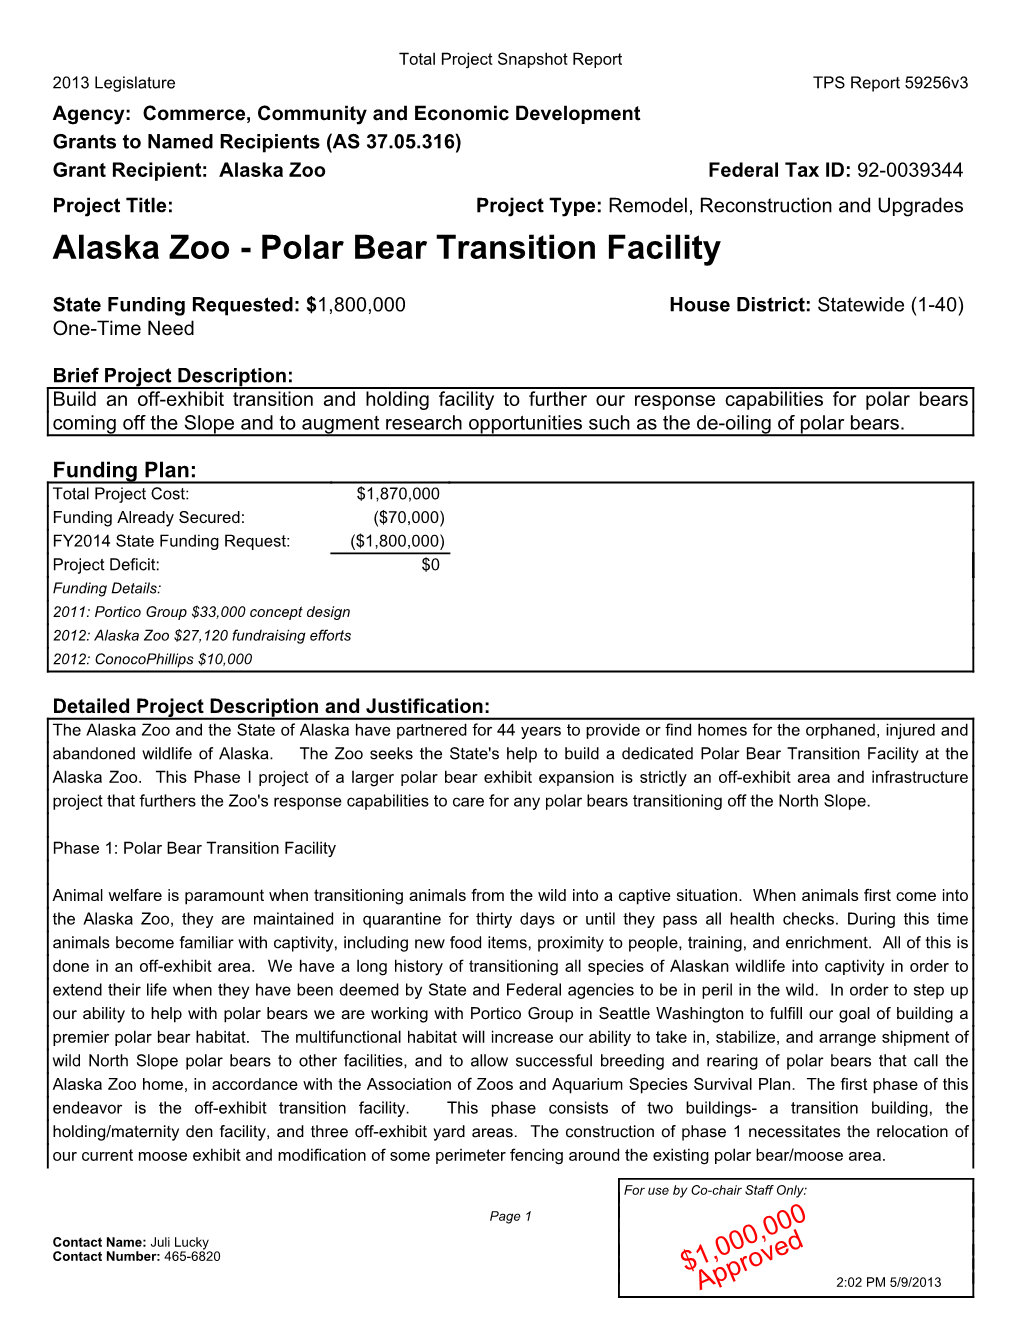 Alaska Zoo Federal Tax ID: 92-0039344 Project Title: Project Type: Remodel, Reconstruction and Upgrades Alaska Zoo - Polar Bear Transition Facility